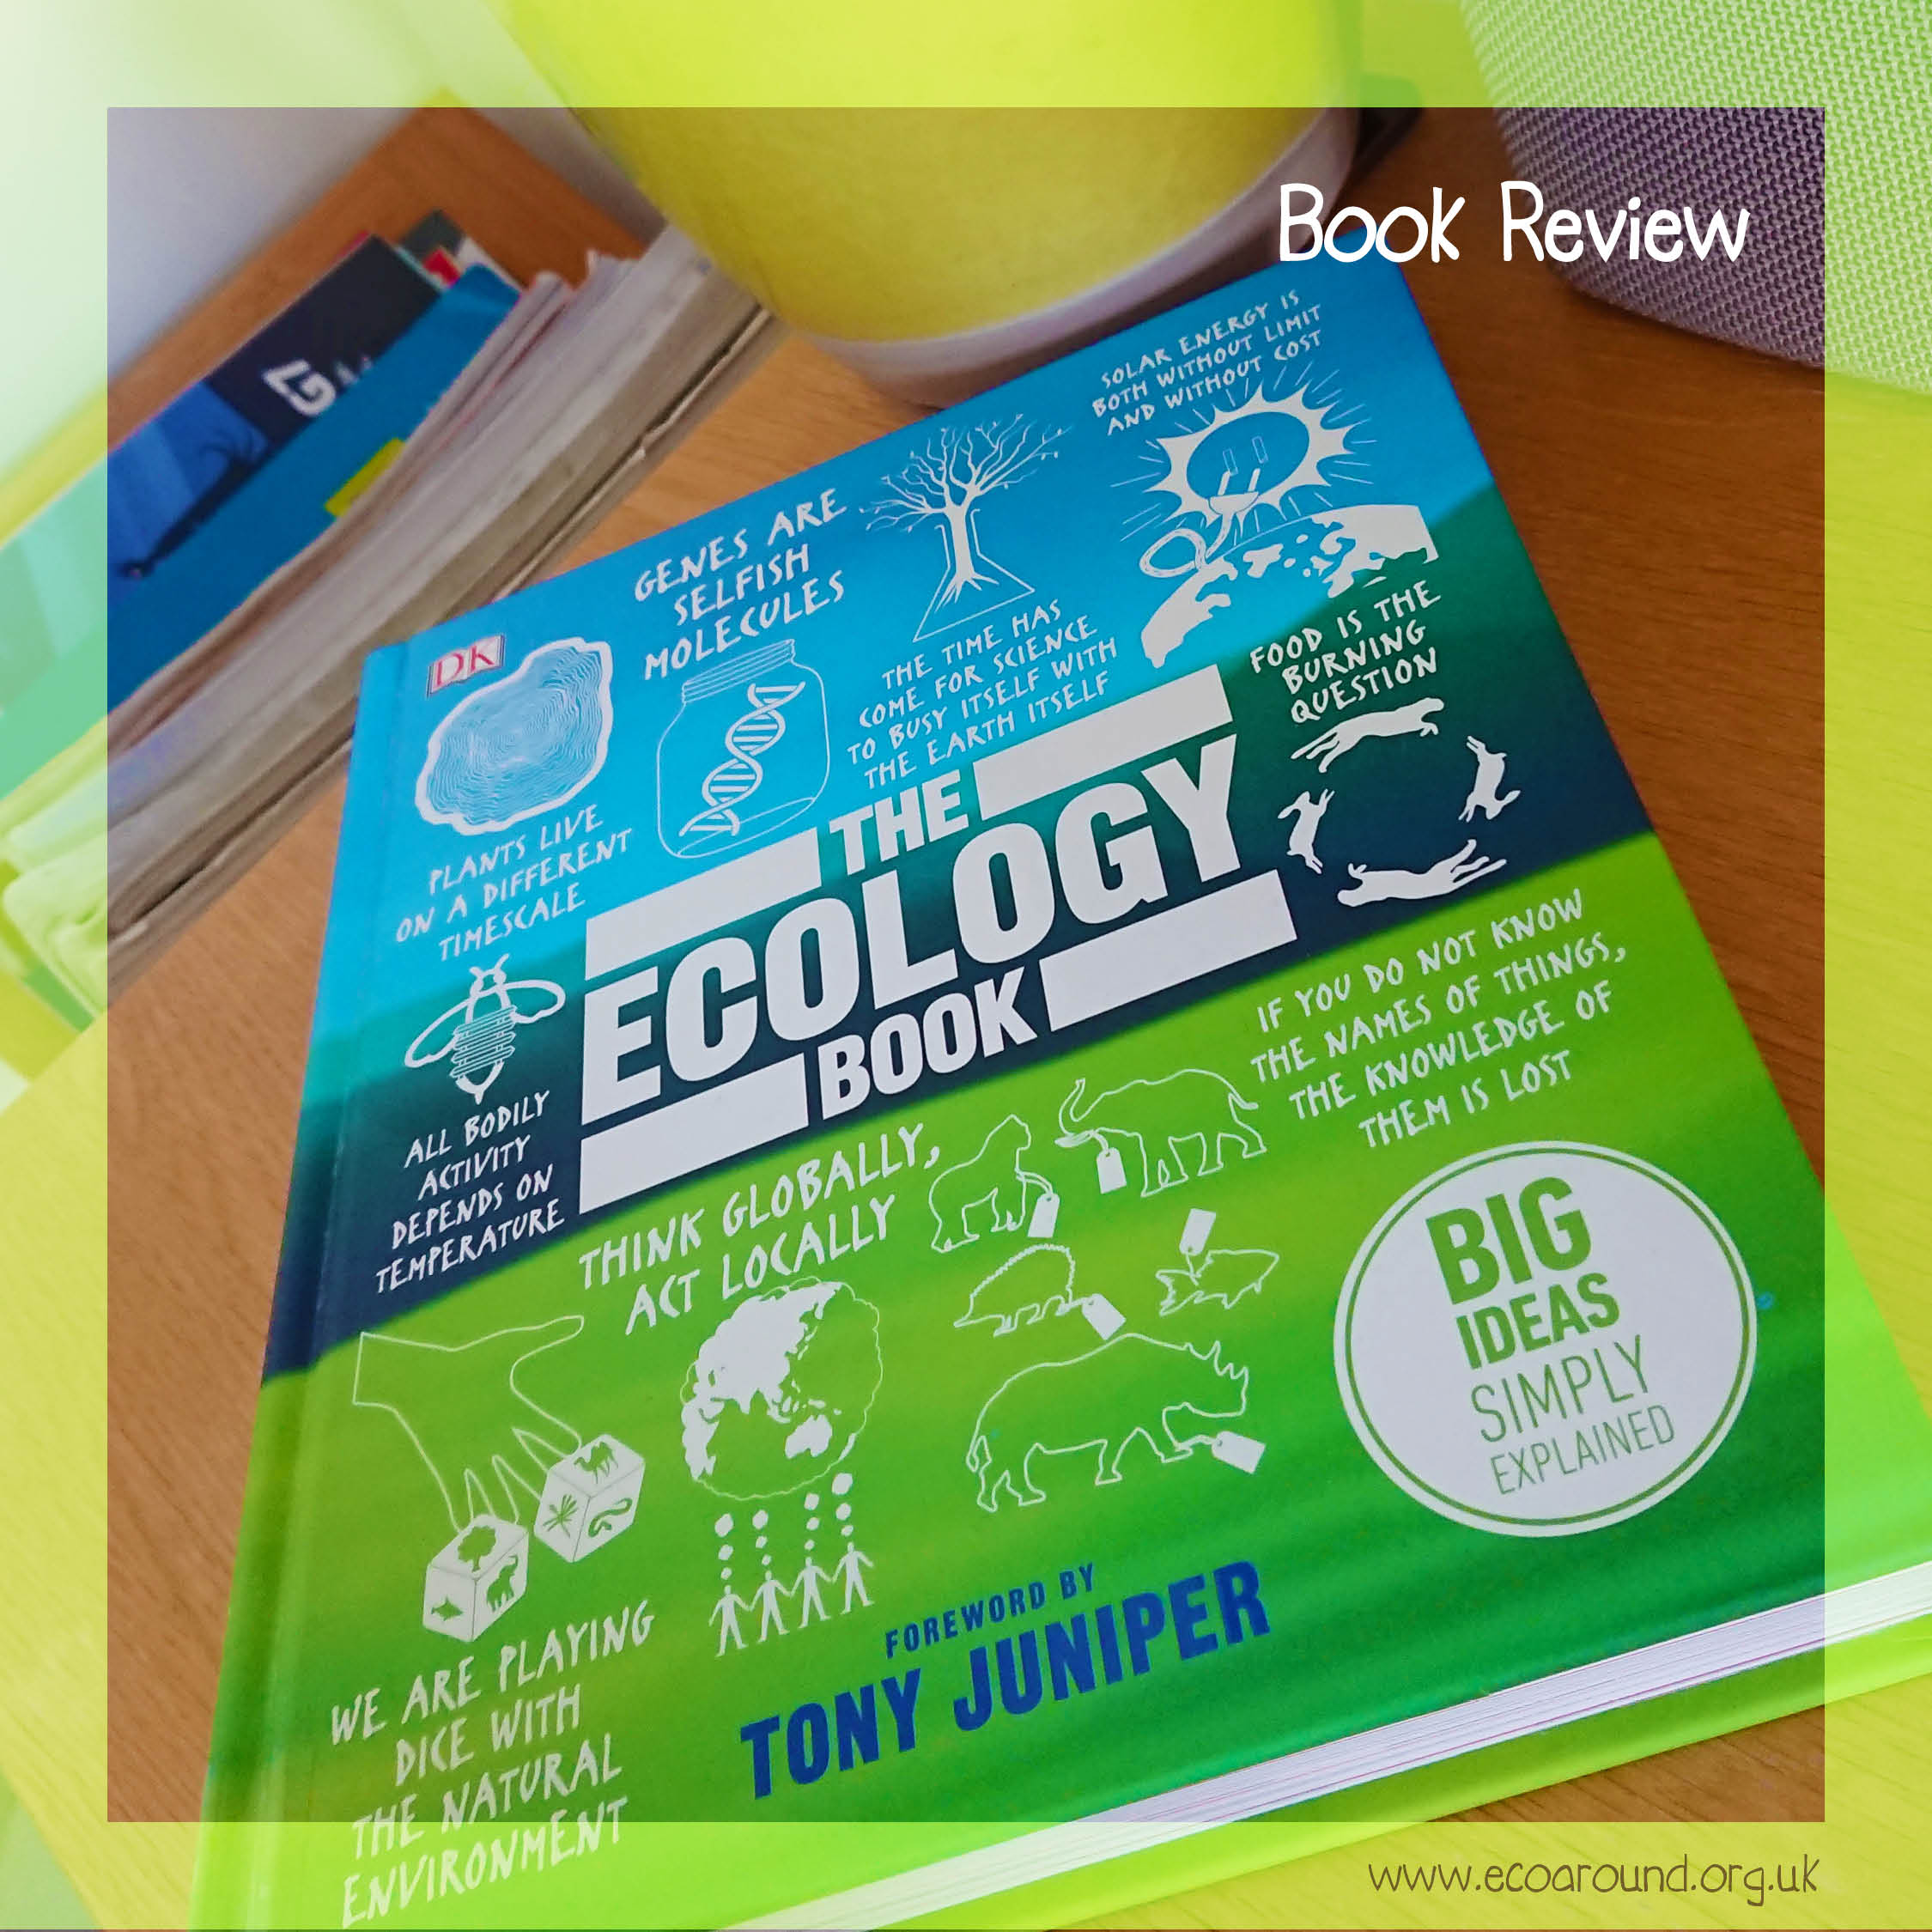 You are currently viewing The Ecology Book with foreword by Tony Juniper – Book Review